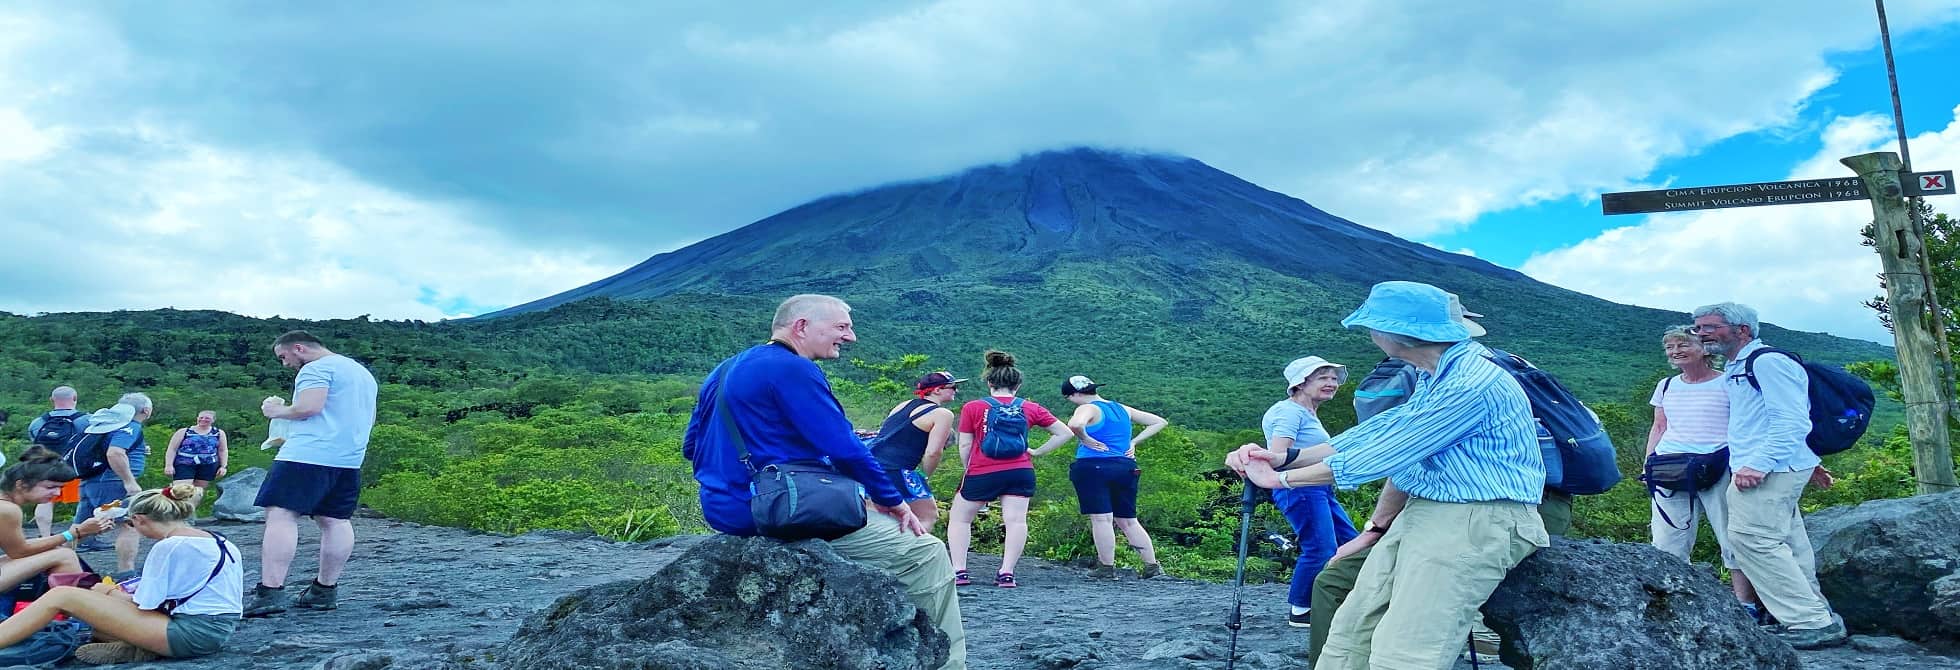 COSTA RICA FAMILY VACATIONS - Natural Expeditions